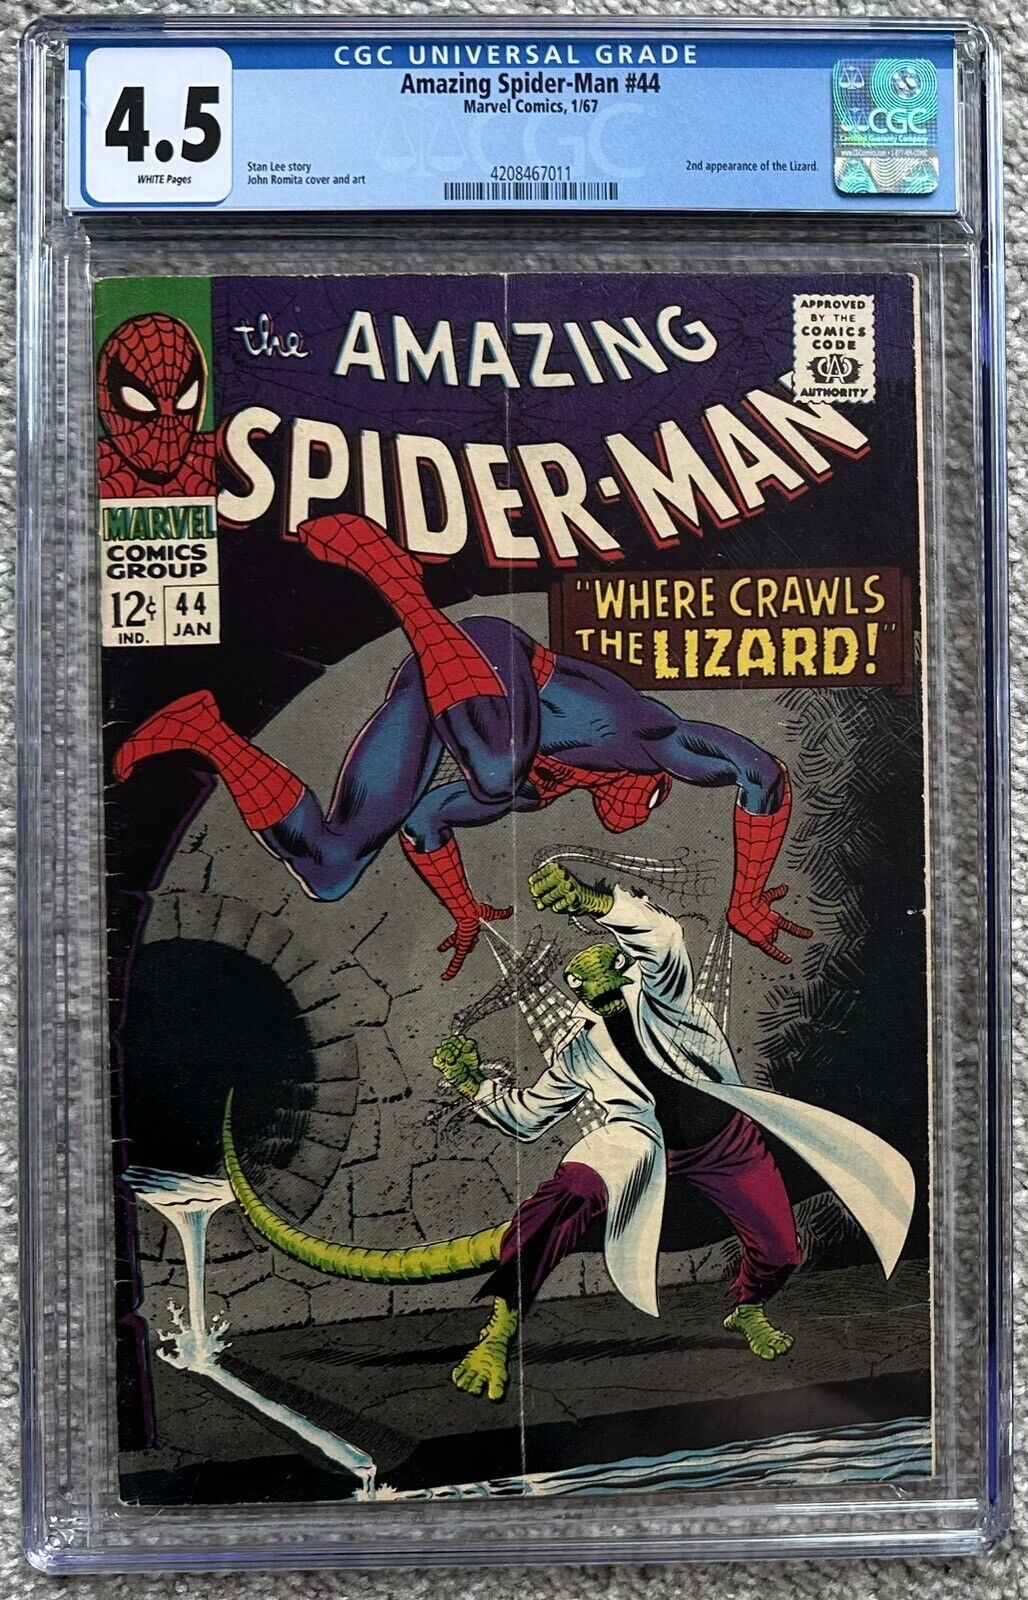 CGC 4.5 THE AMAZING SPIDER-MAN #44 (MARVEL,1967) 2ND APP OF THE LIZARD